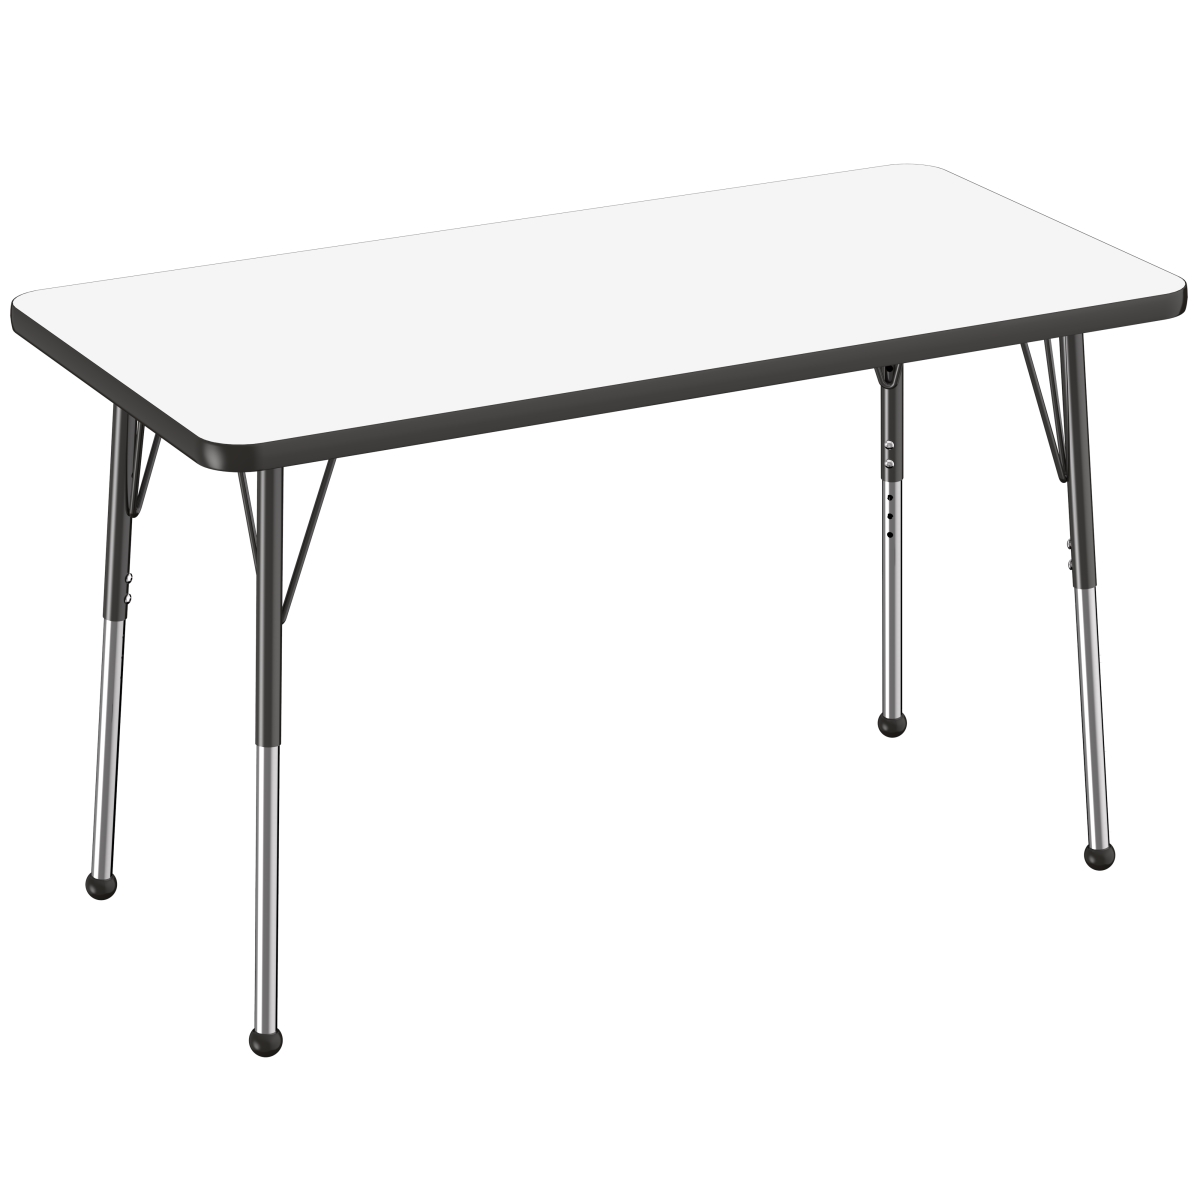 10161-debk 24 X 48 In. Rectangle Dry-erase Adjustable Activity Table With Standard Ball - Black